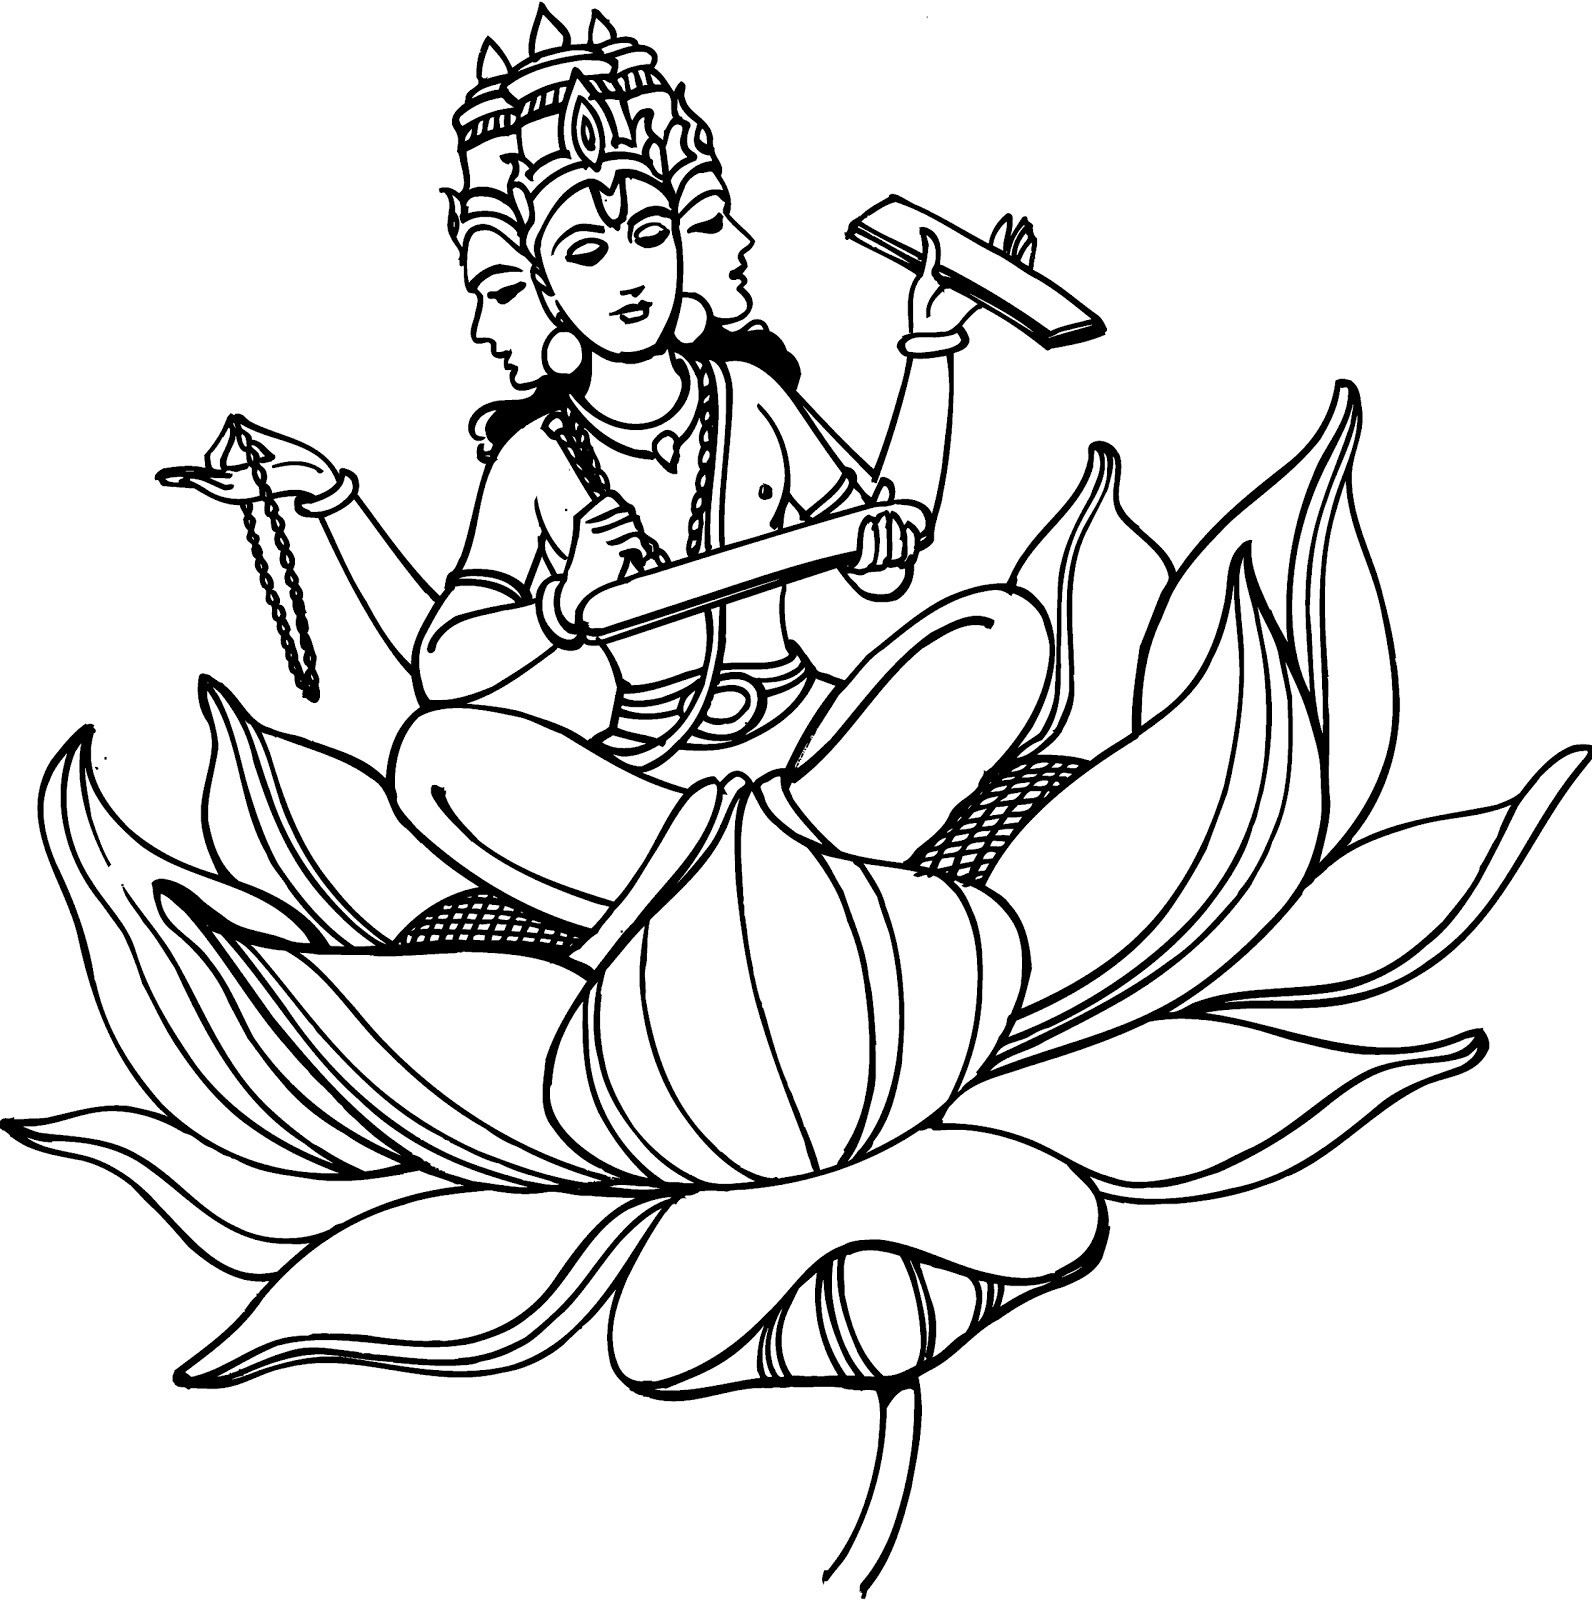 ALL-IN-ONE WALLPAPERS: Pencil Drawings Hindu Gods Wallpapers